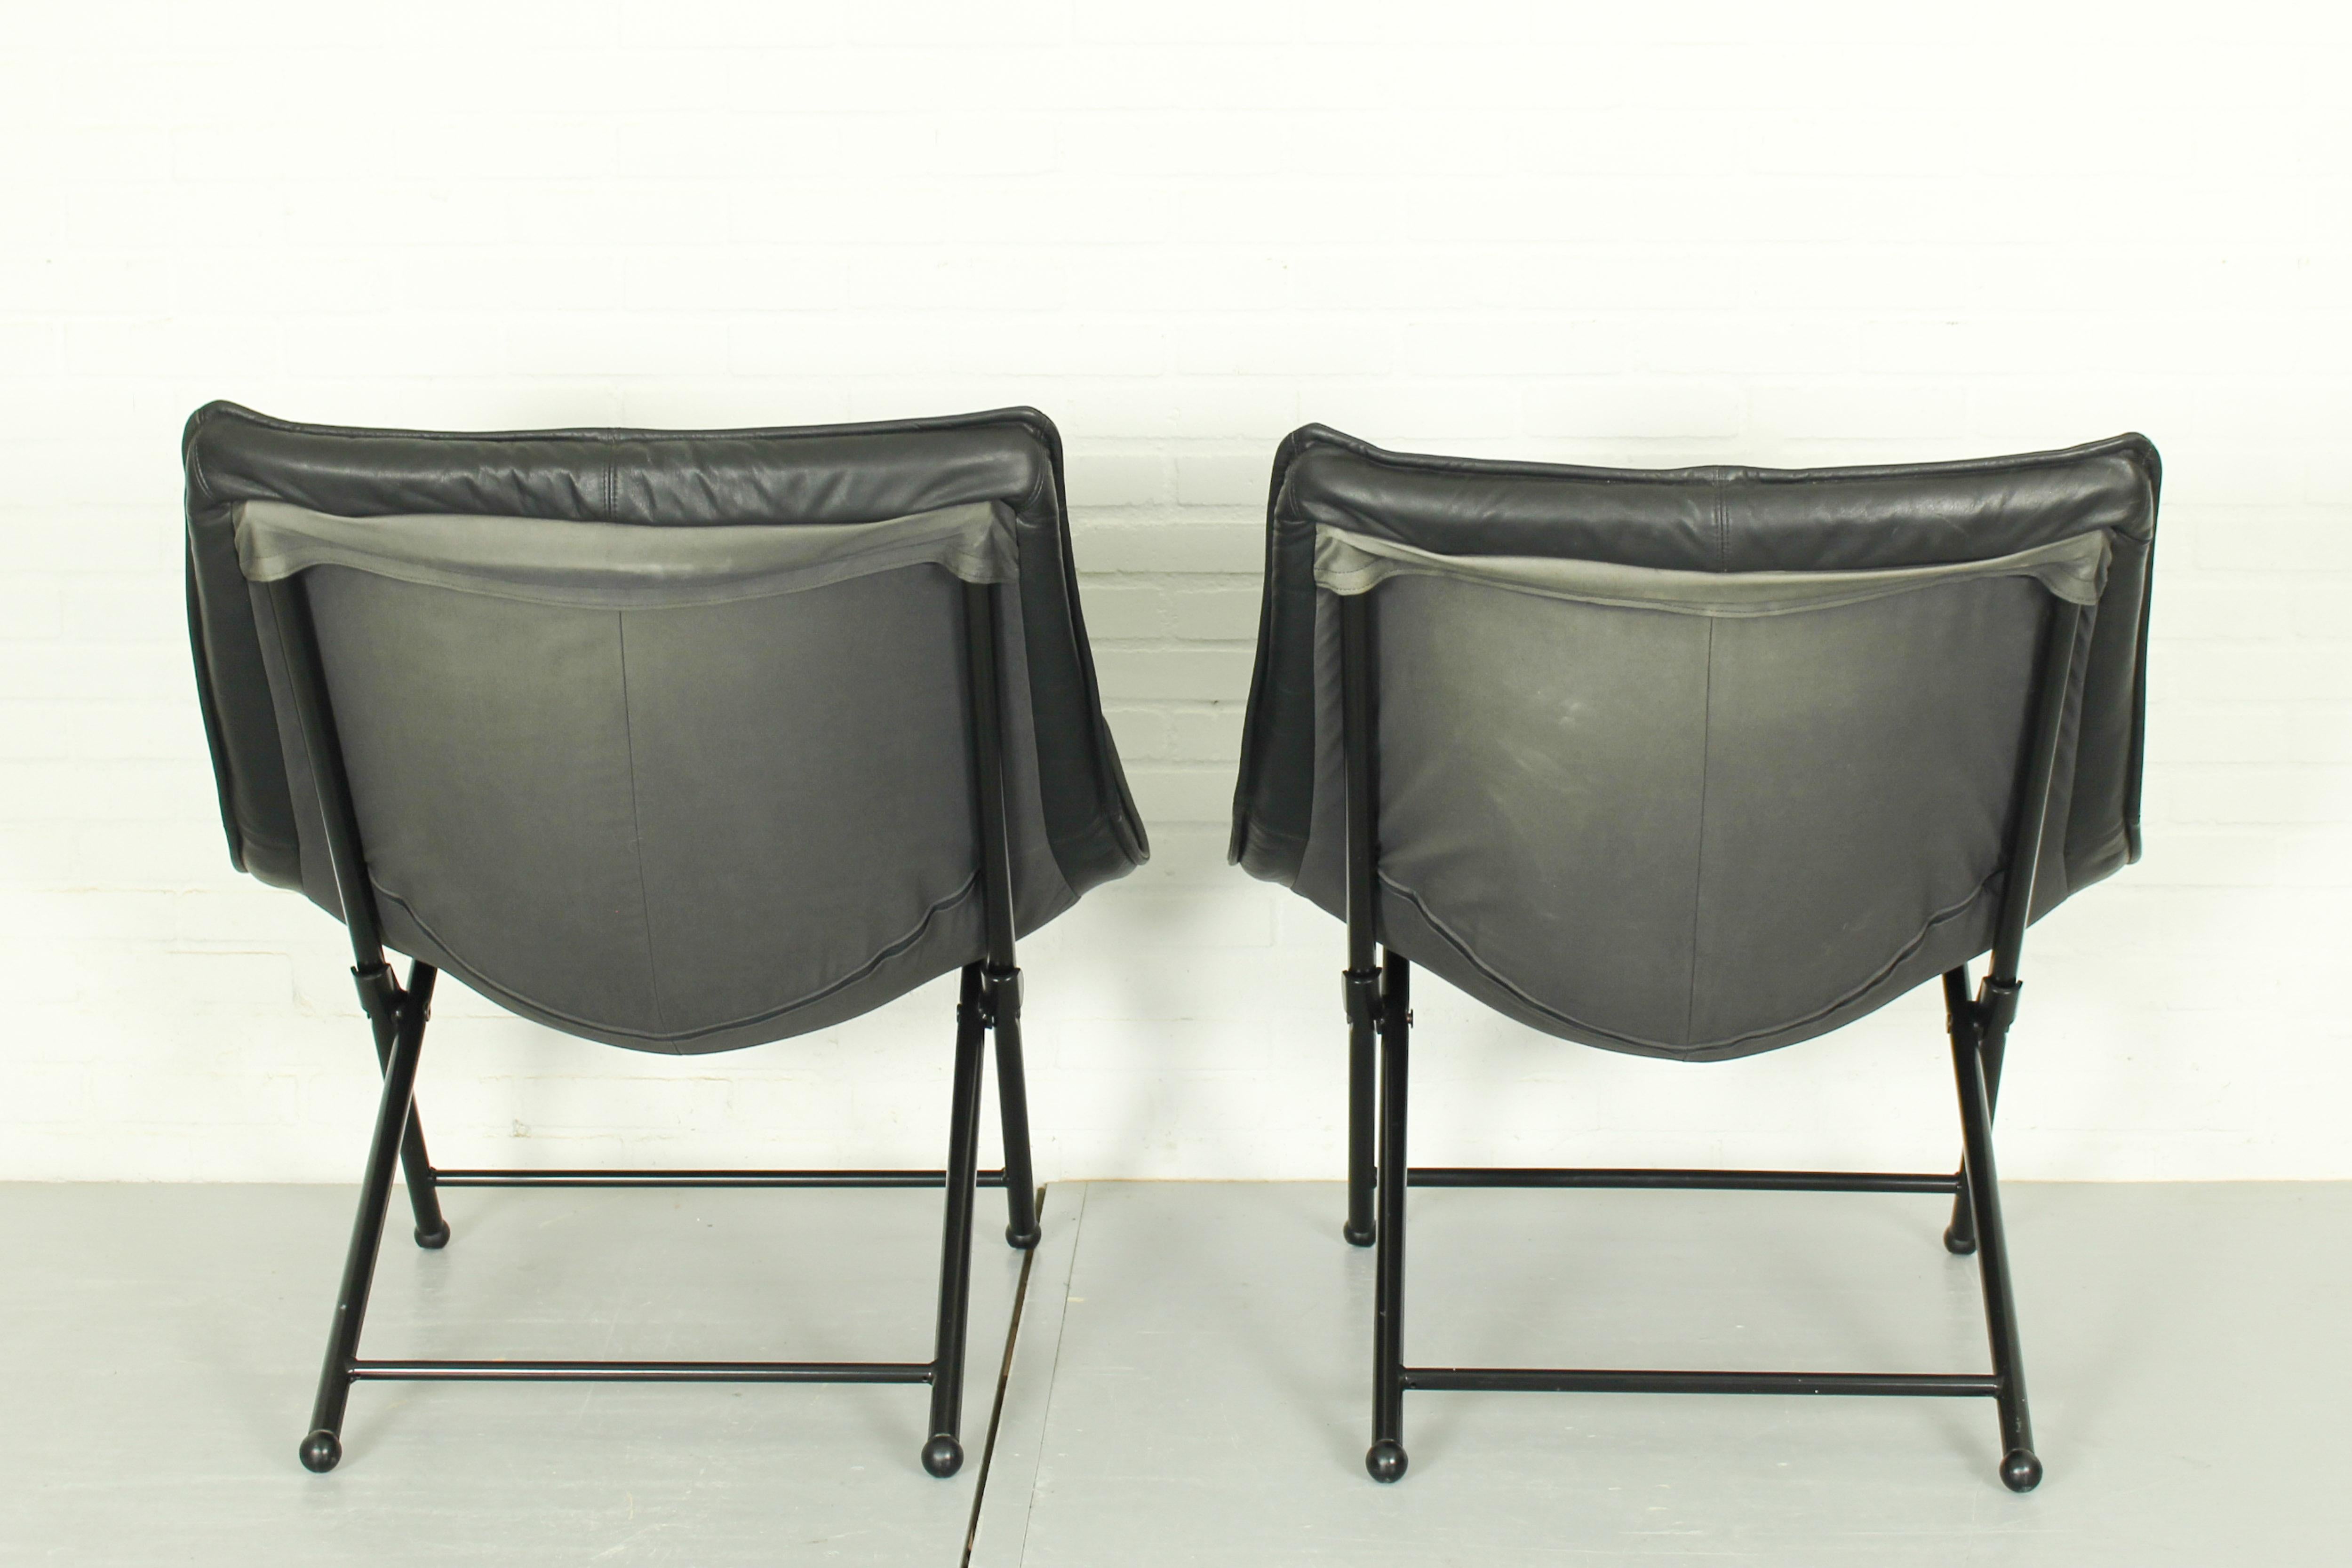 Folding Lounge Chairs in Black Leather by Teun Van Zanten for Molinari, 1970s For Sale 2